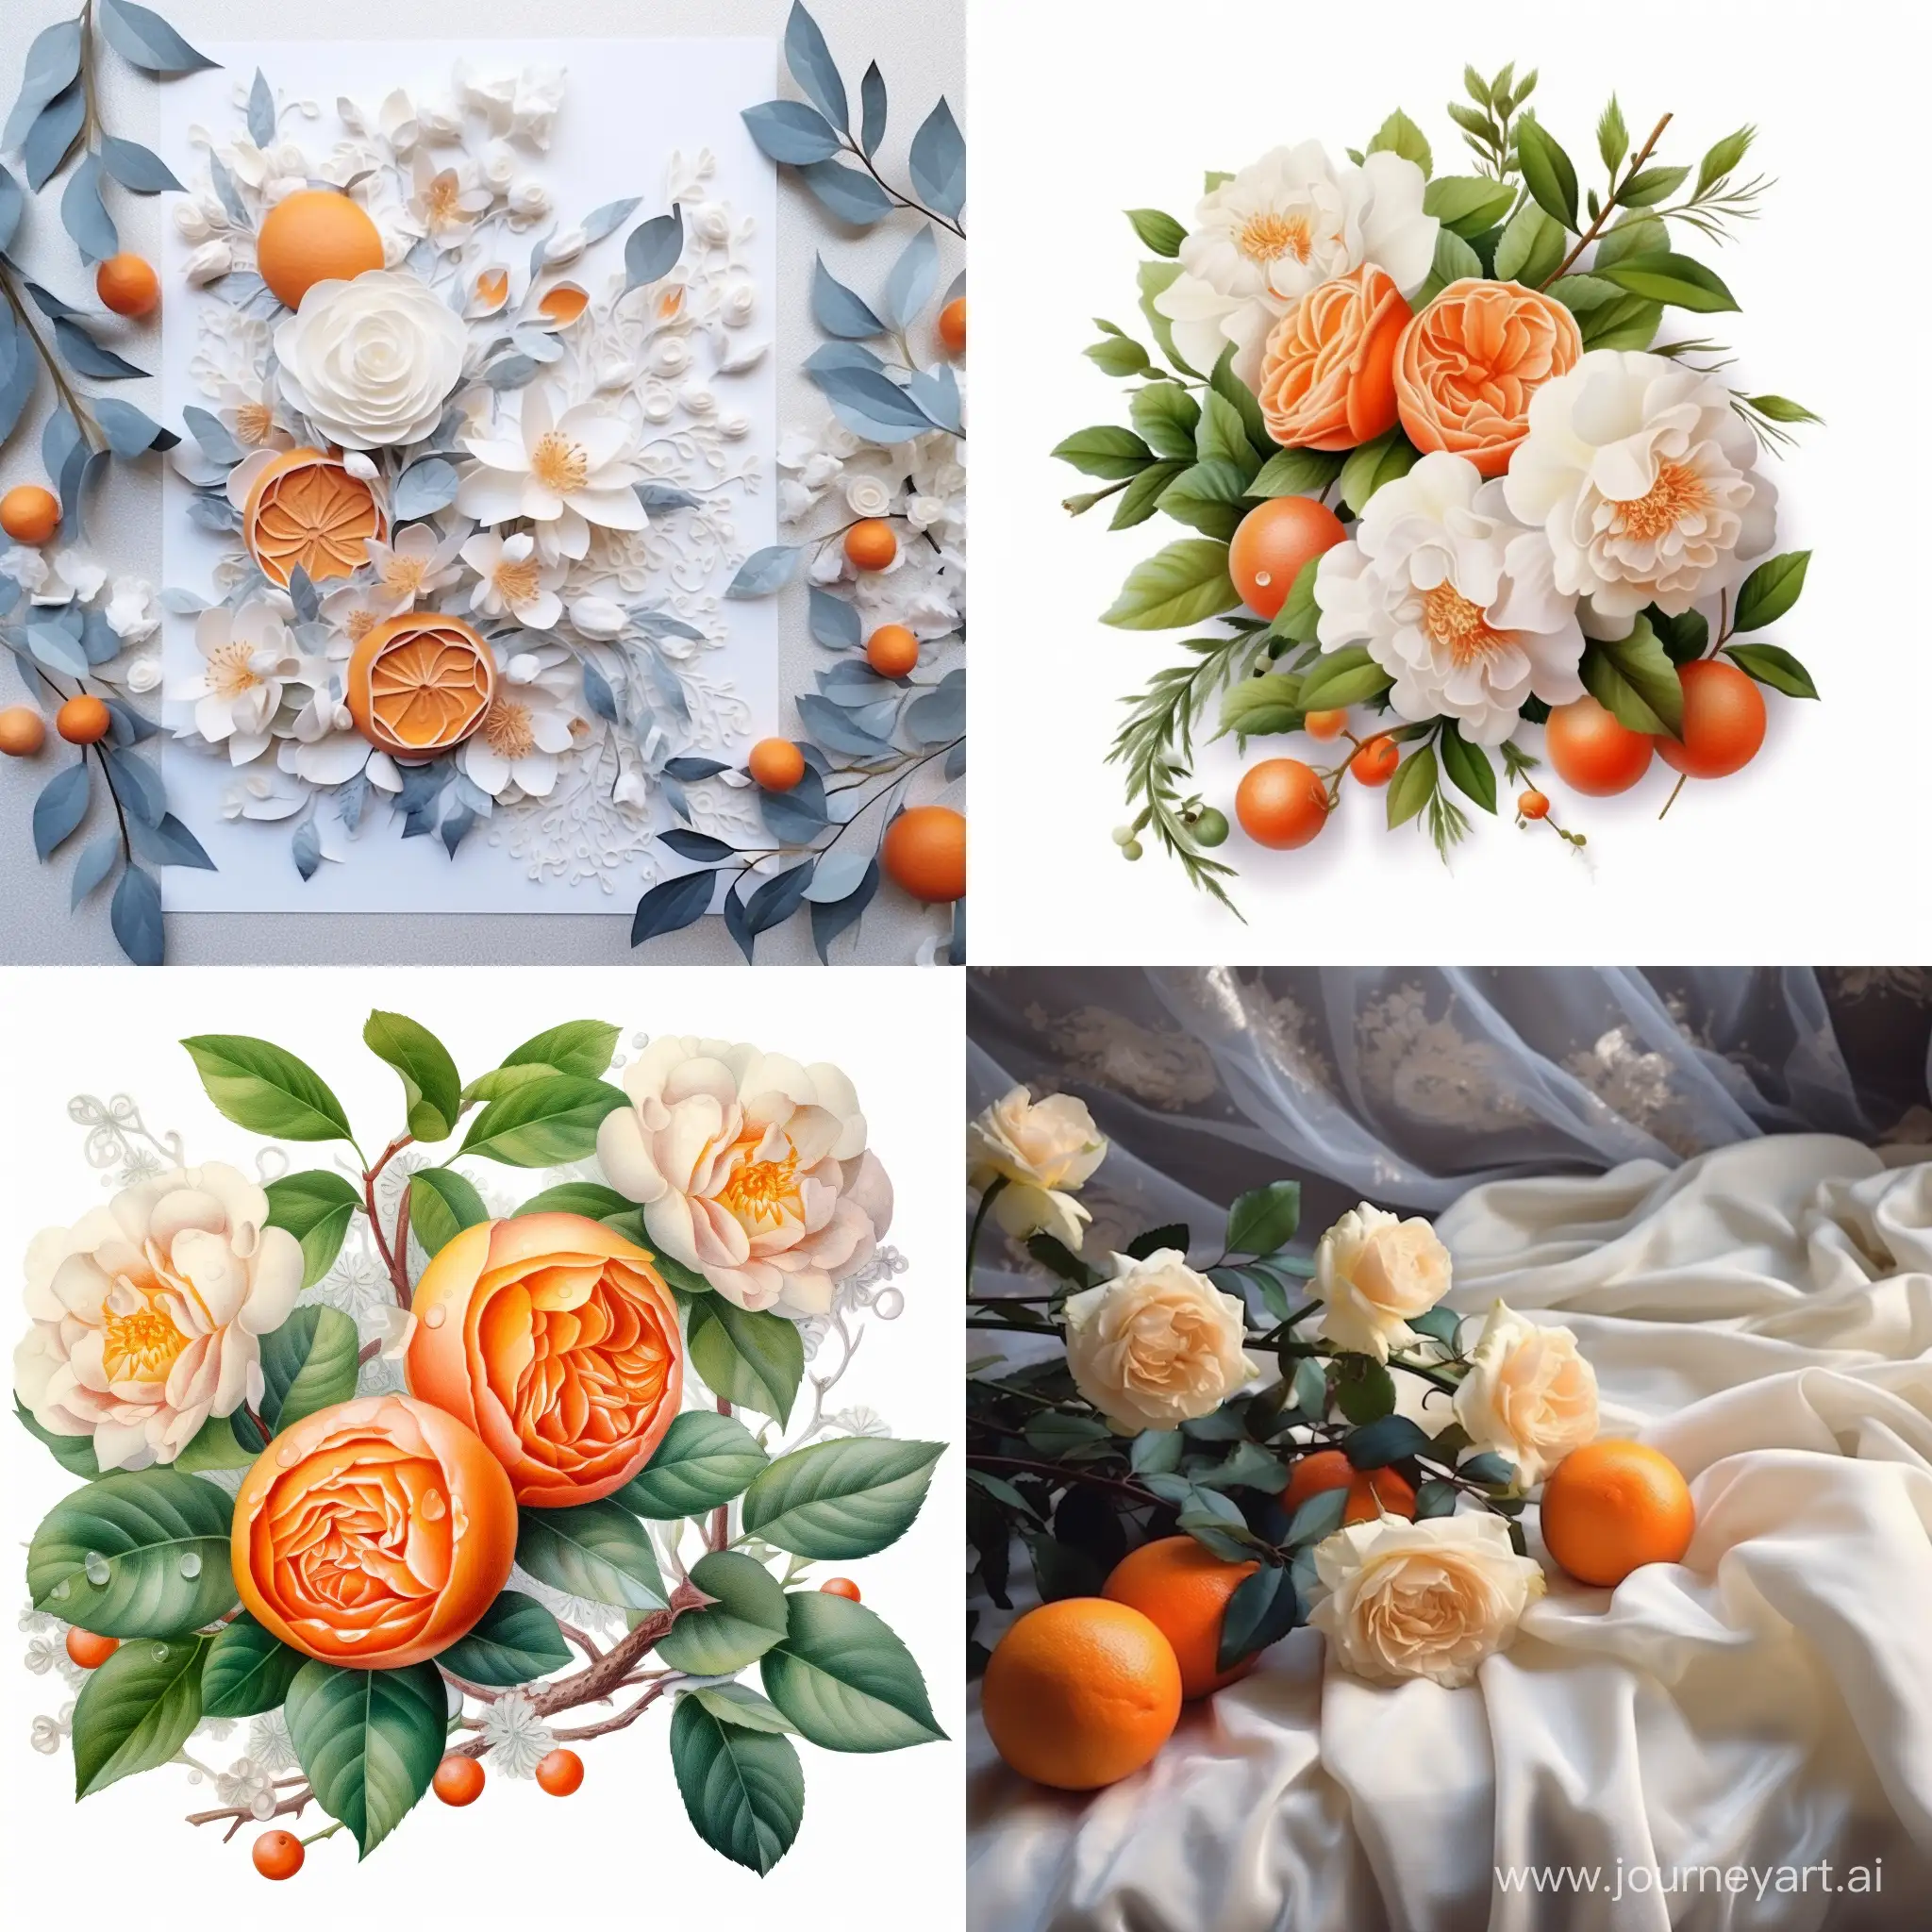 Winter-Greeting-Card-with-Tangerines-and-Roses-on-White-Background